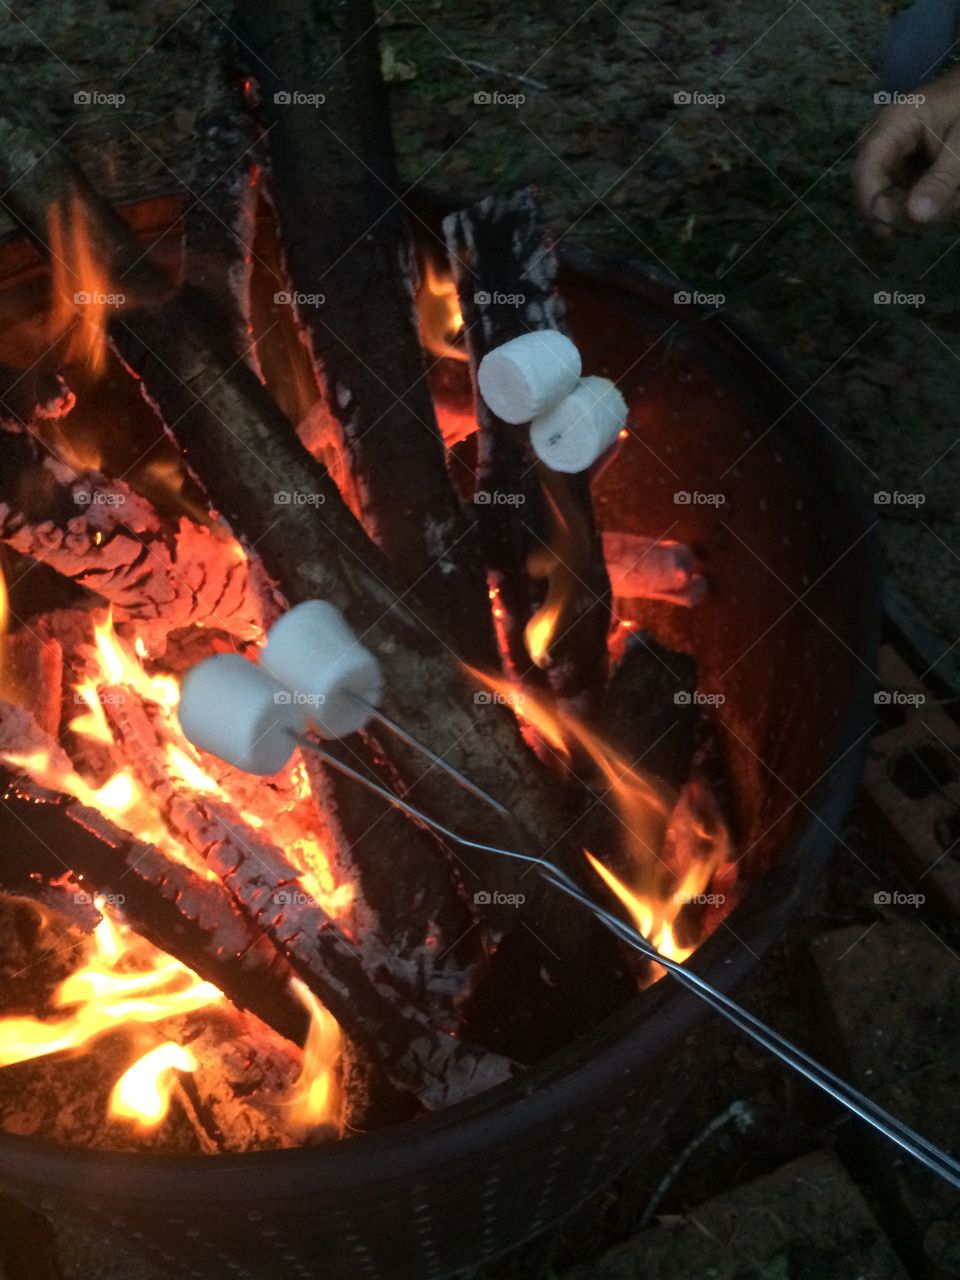 Roasting marshmallows with friends 
